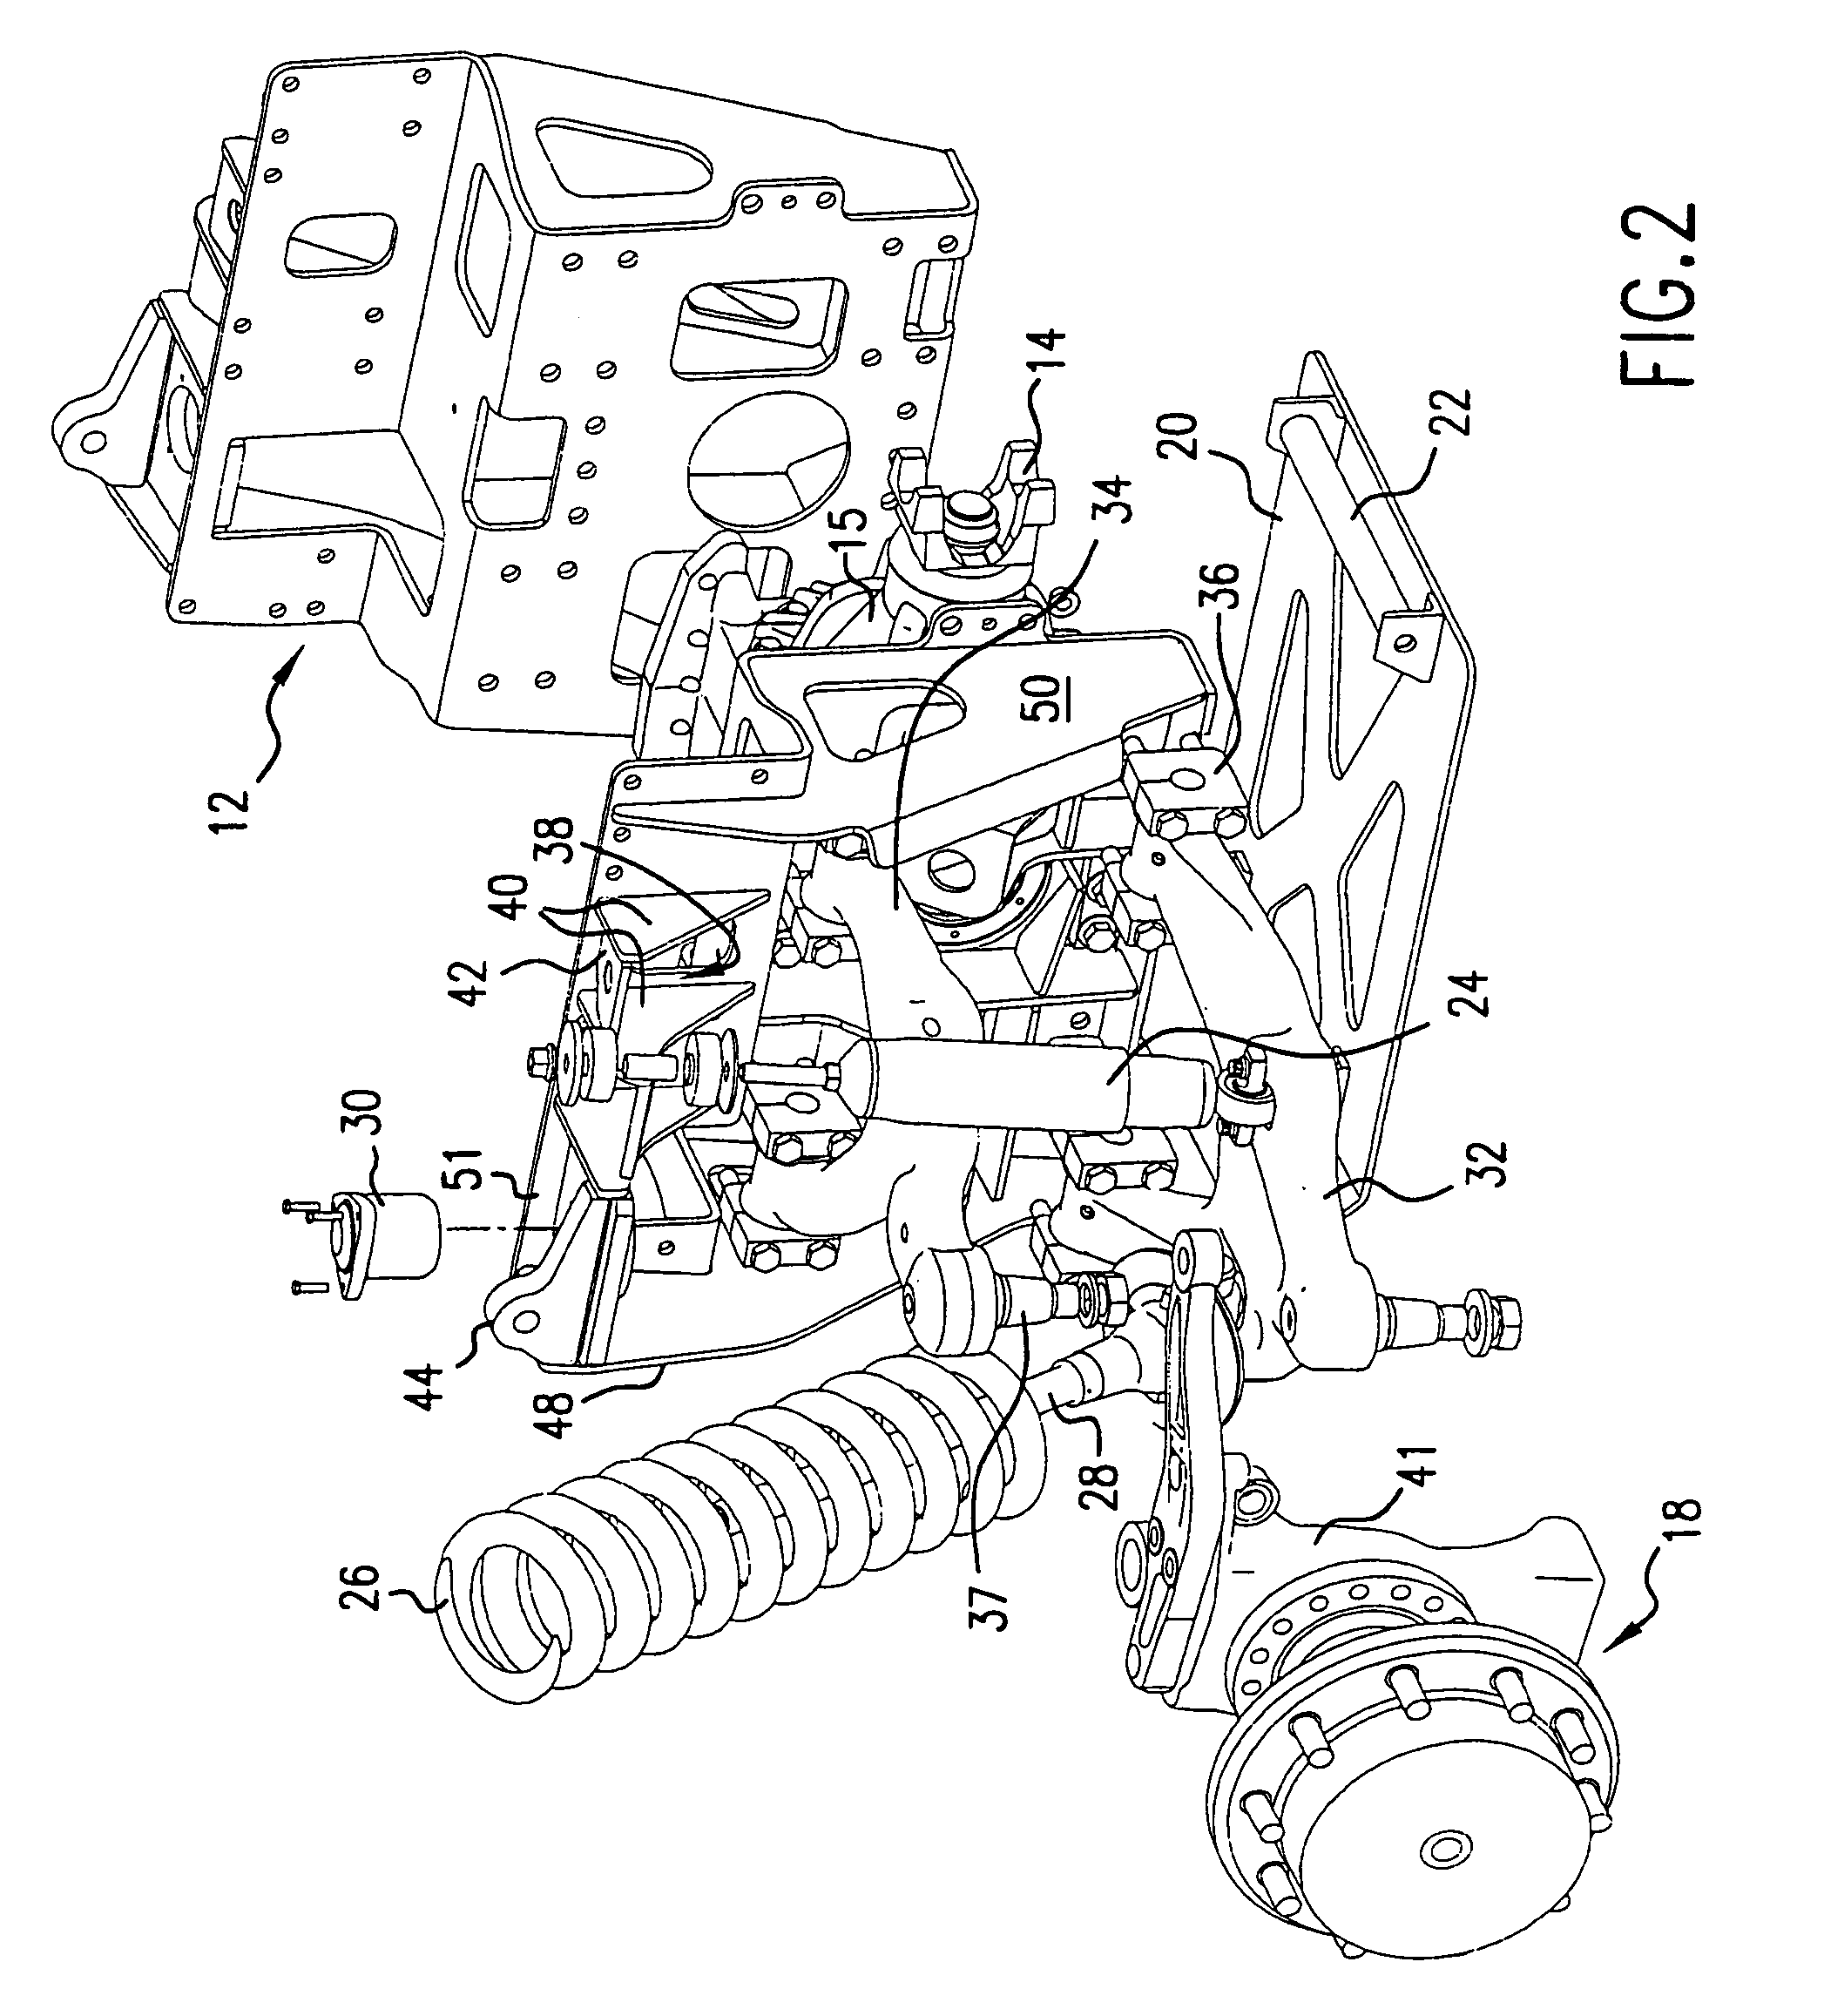 Mounting assembly for a vehicle suspension arm